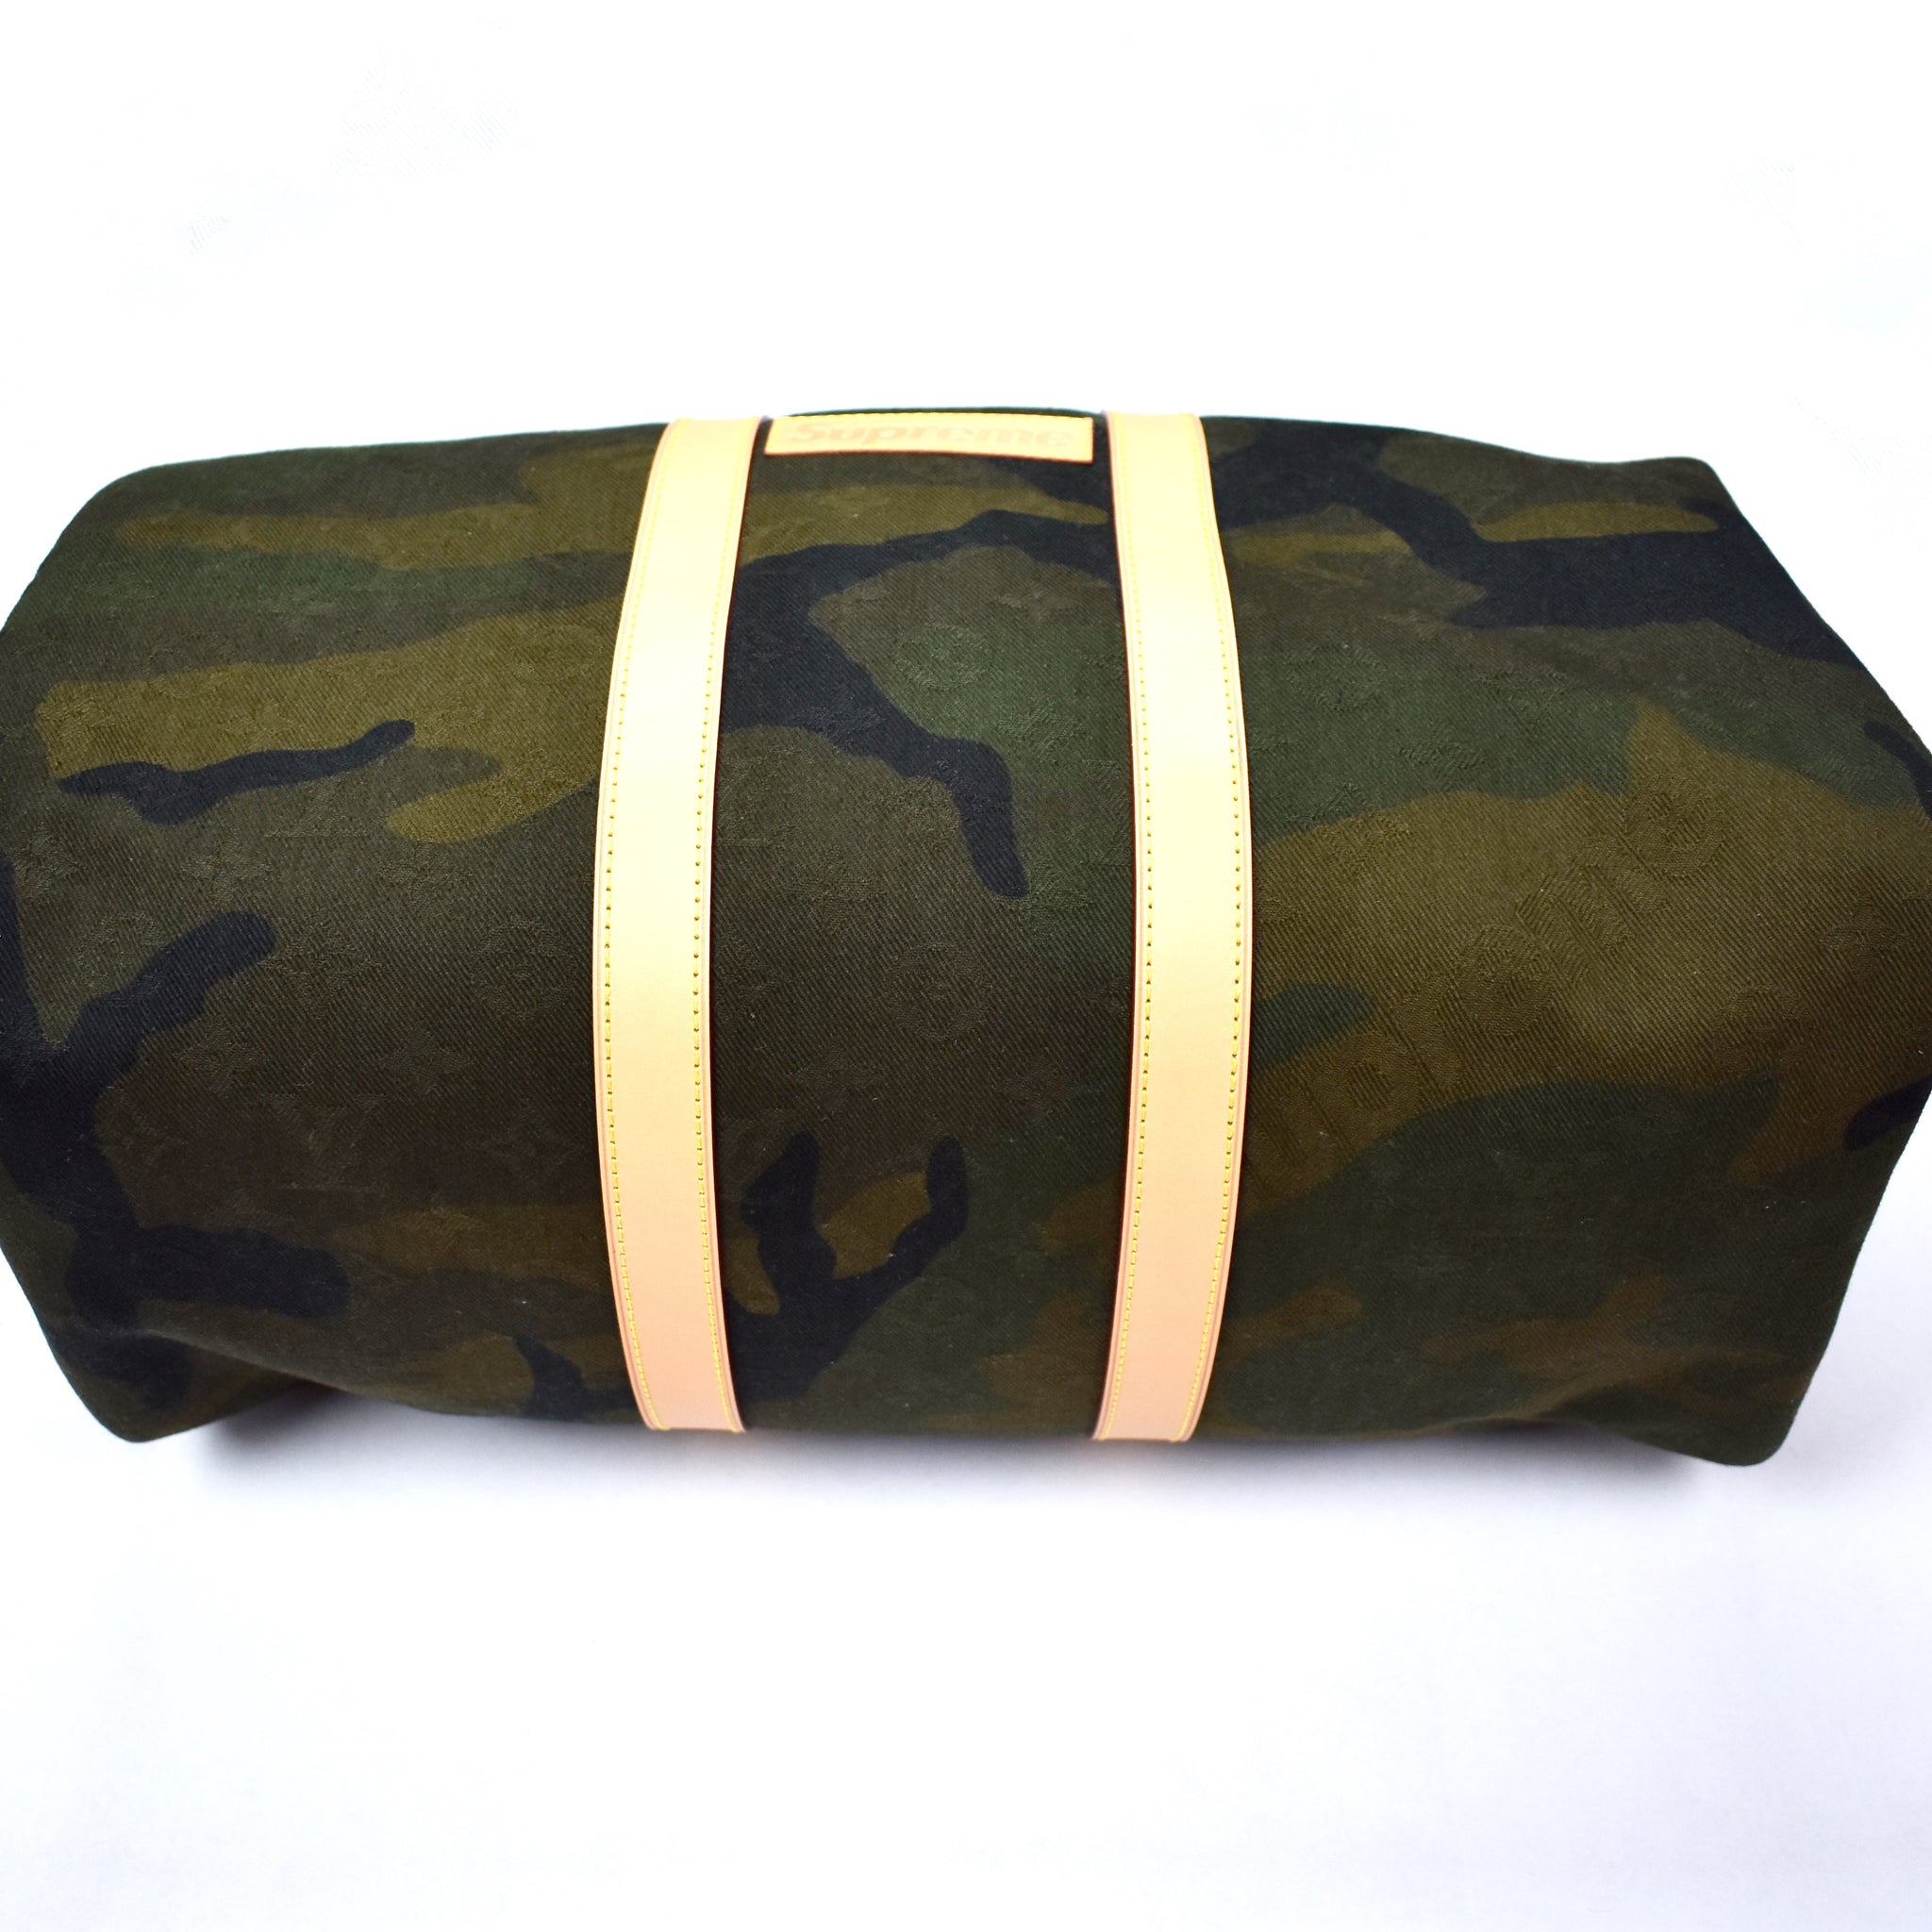 Louis Vuitton Supreme Camouflage Keepall 45 at 1stDibs  lv camo duffle bag,  louis vuitton camo keepall, louis vuitton keepall camouflage